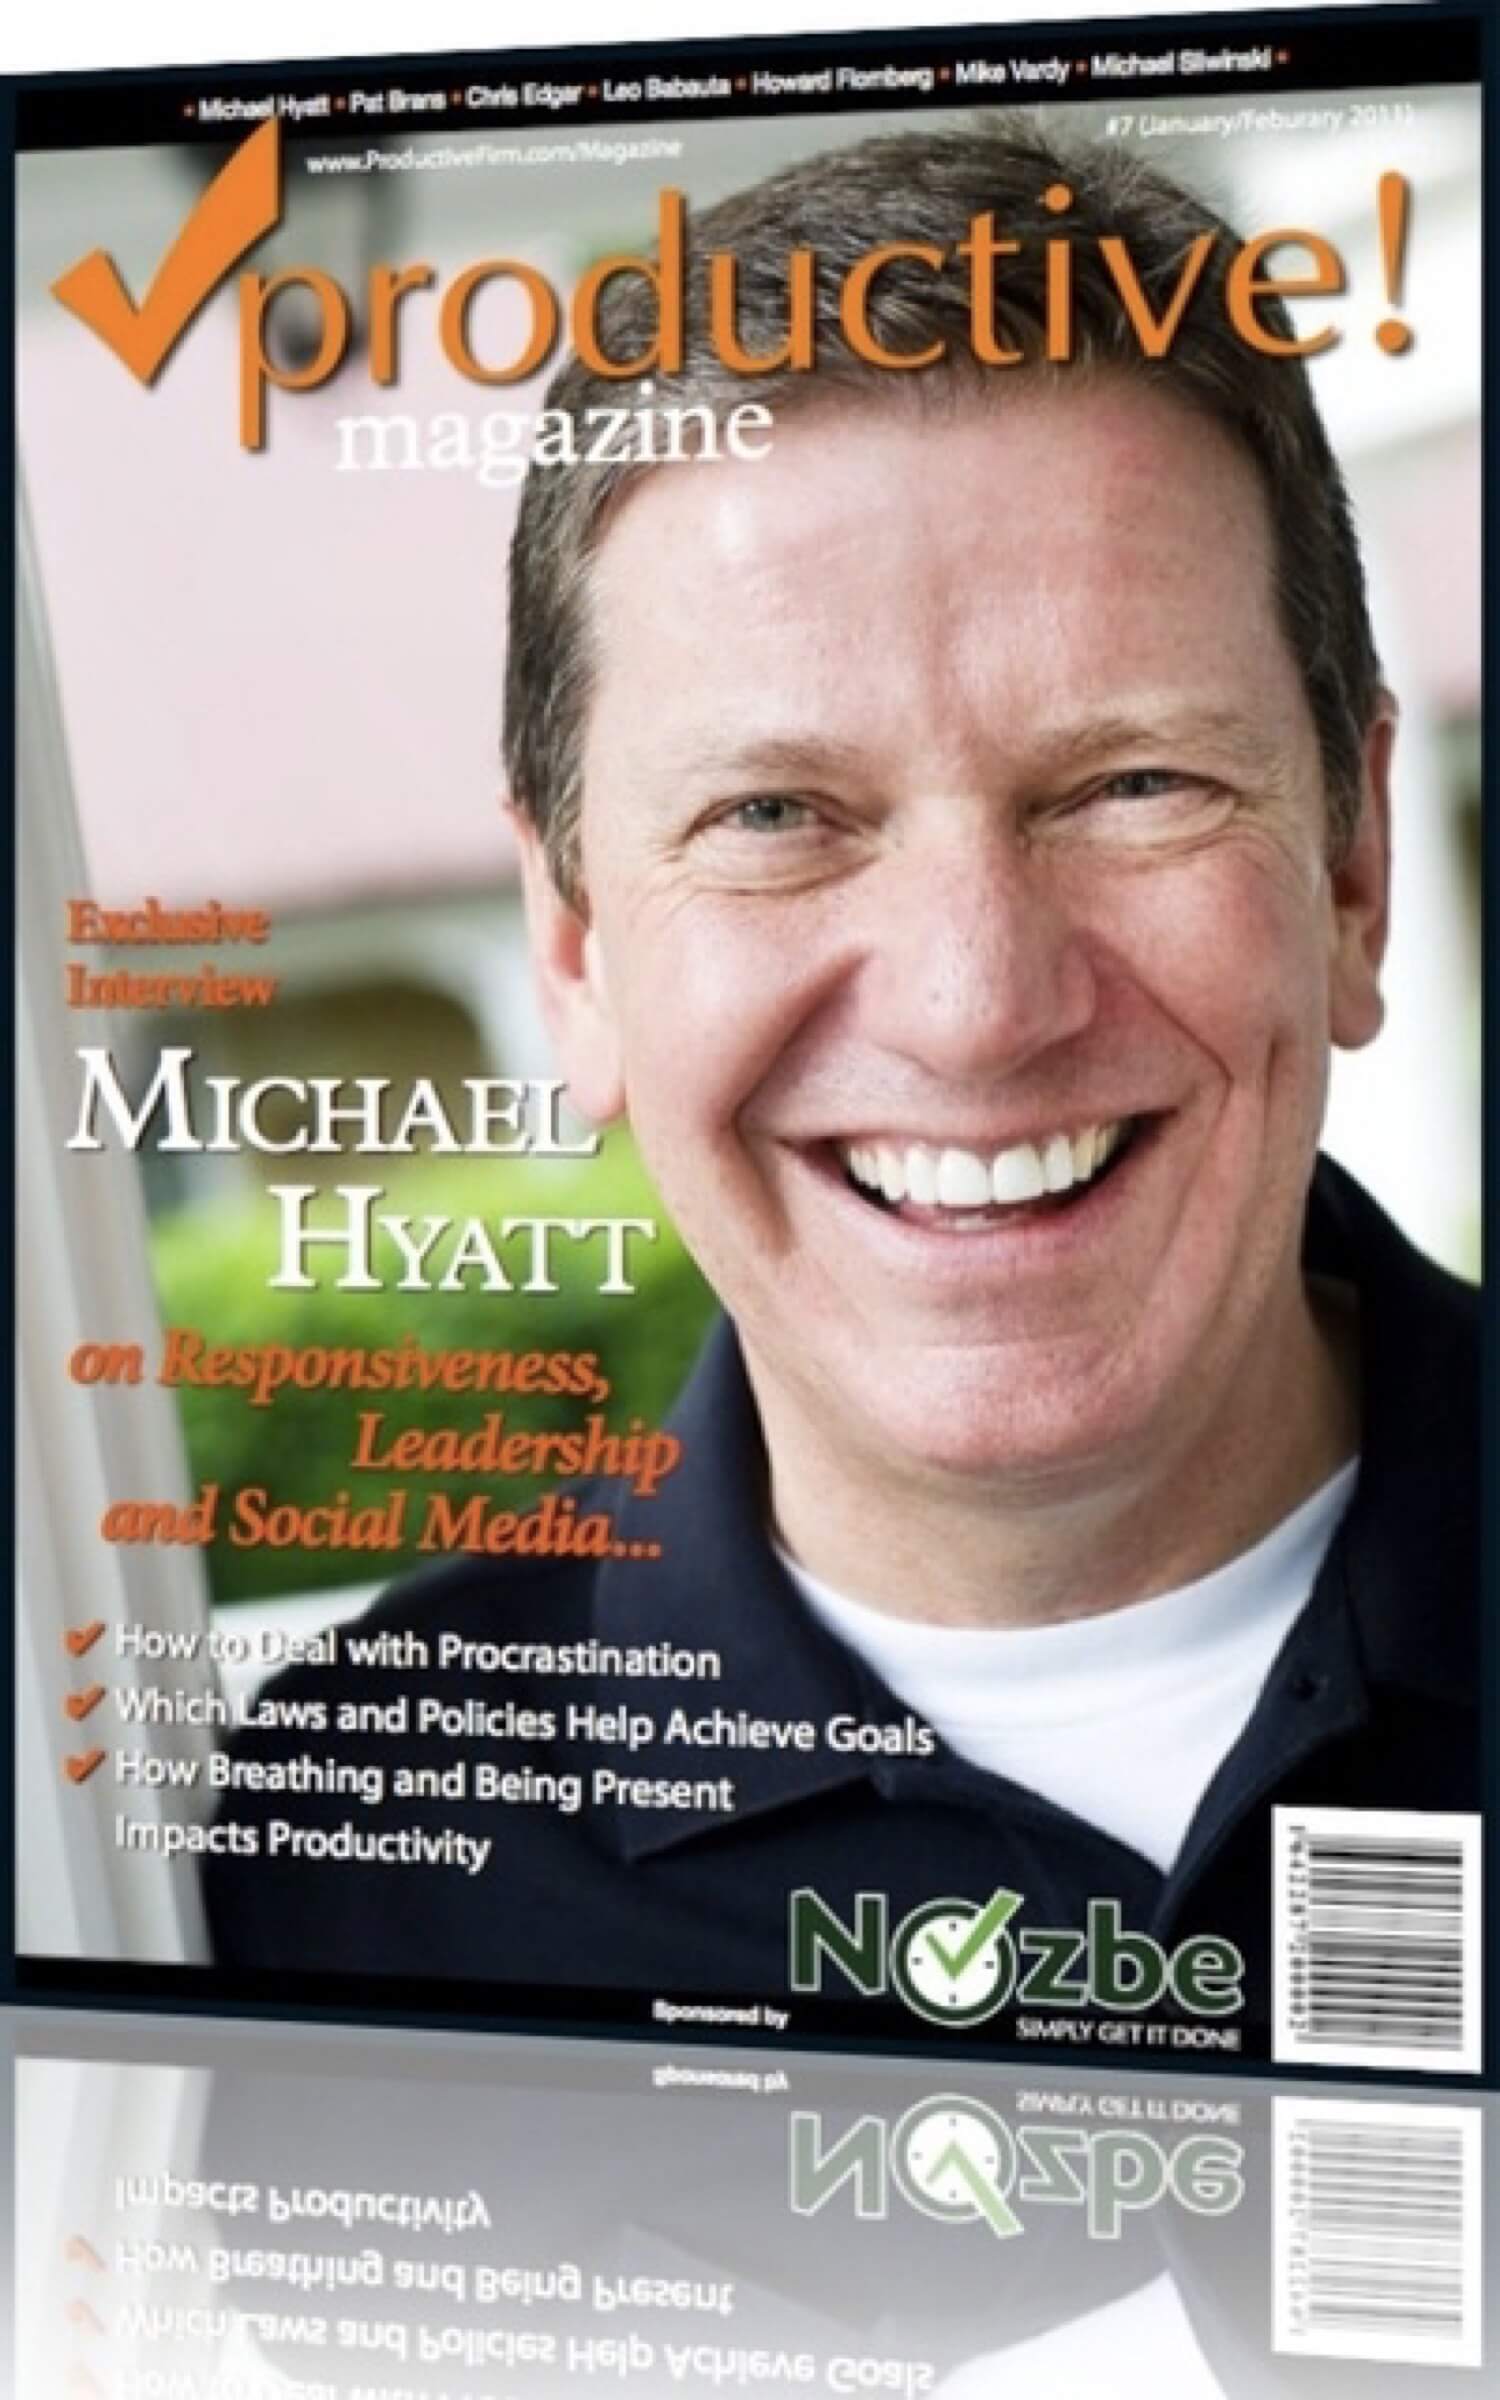 Download Productive Magazine #7 with Michael Hyatt about productivity, leadership and social media